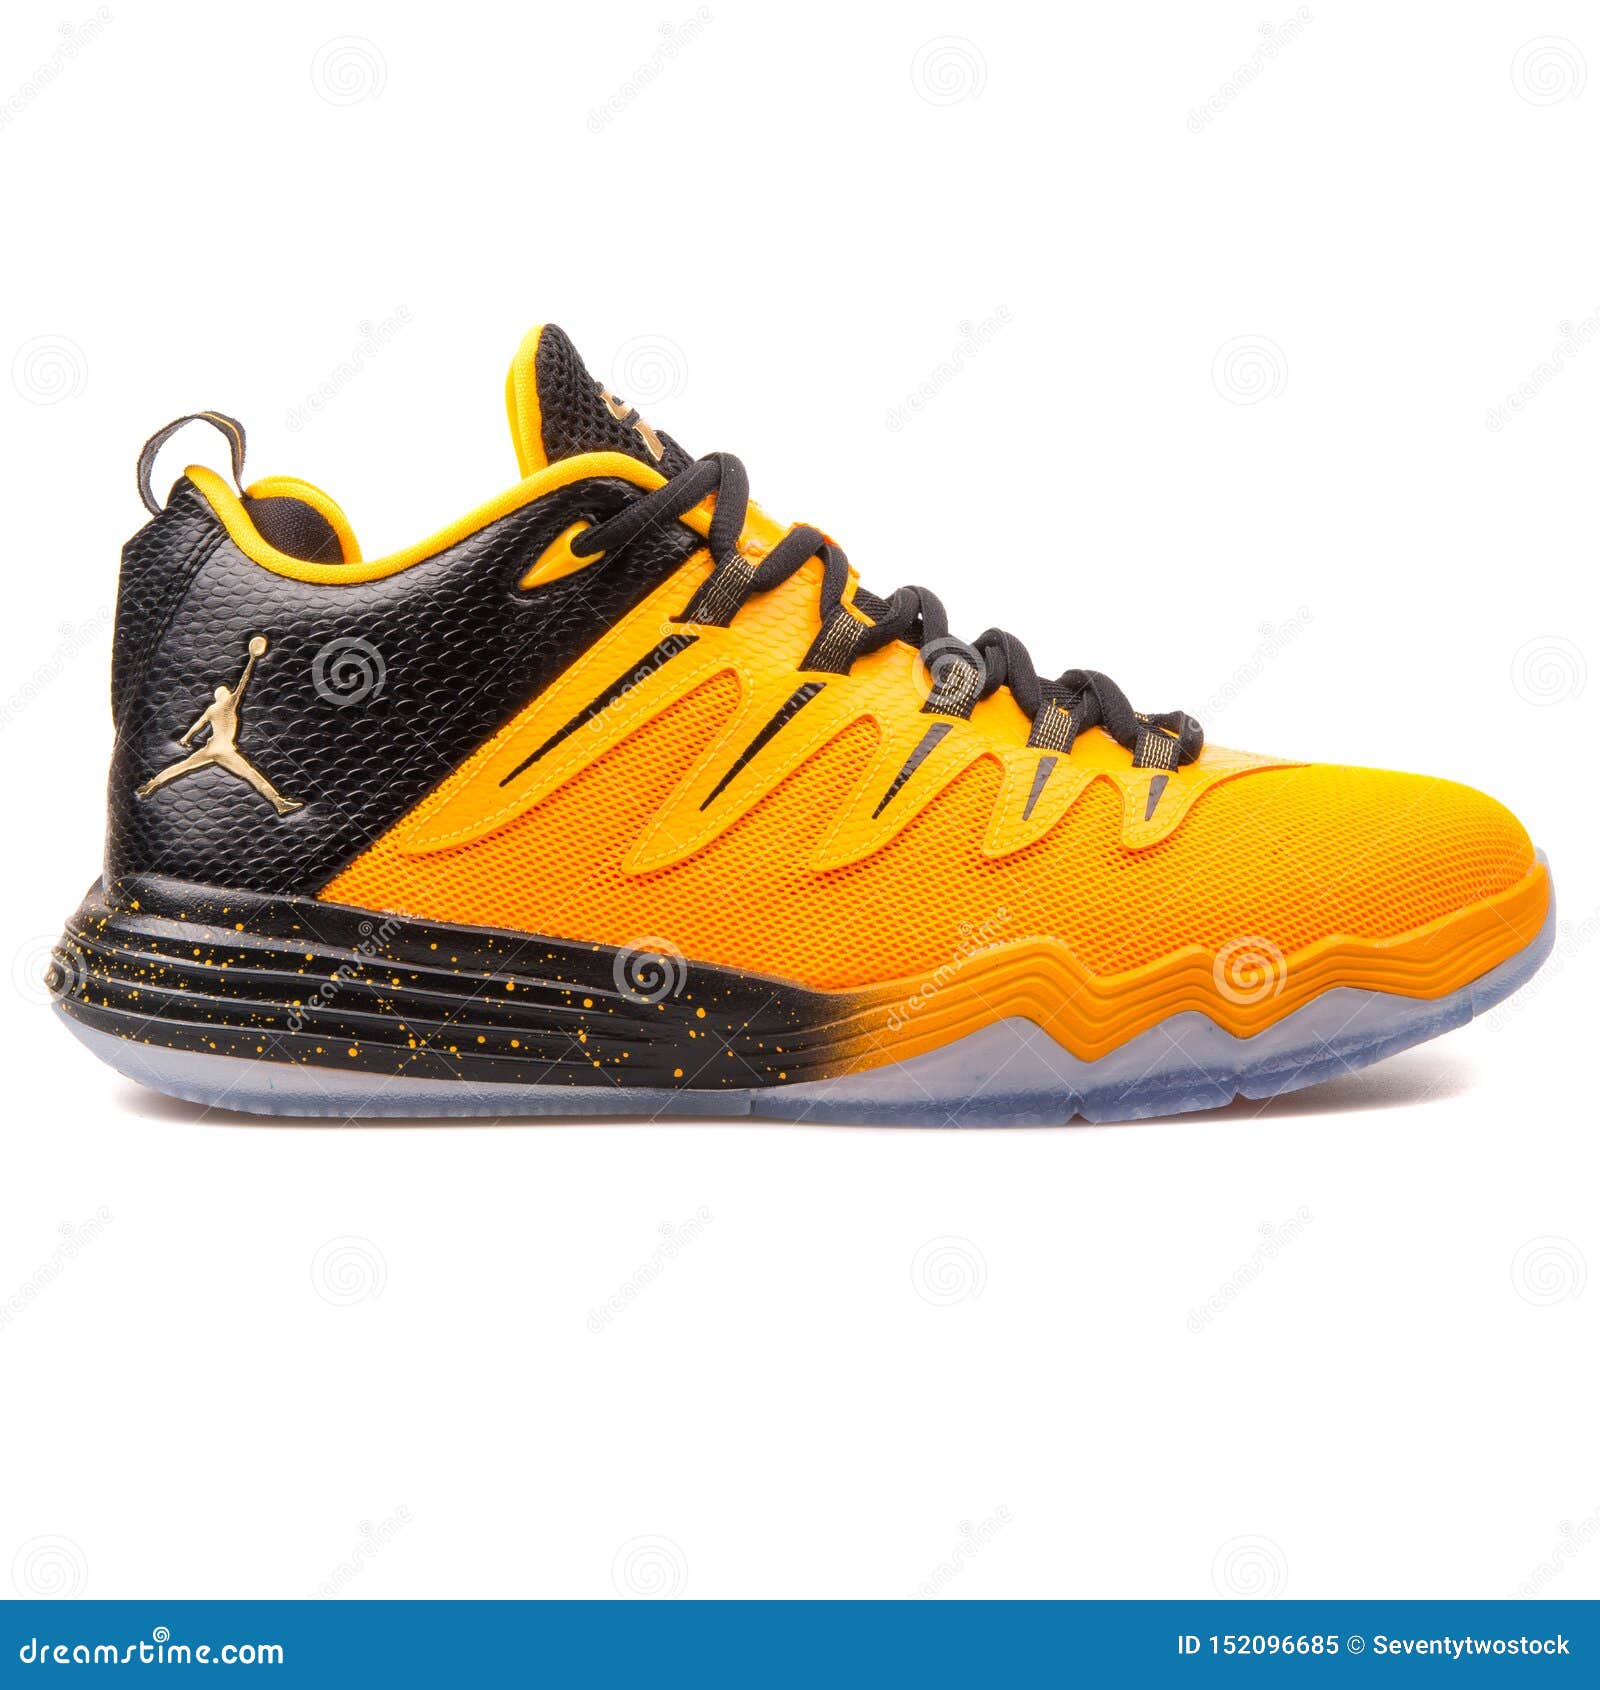 cp3 9 price